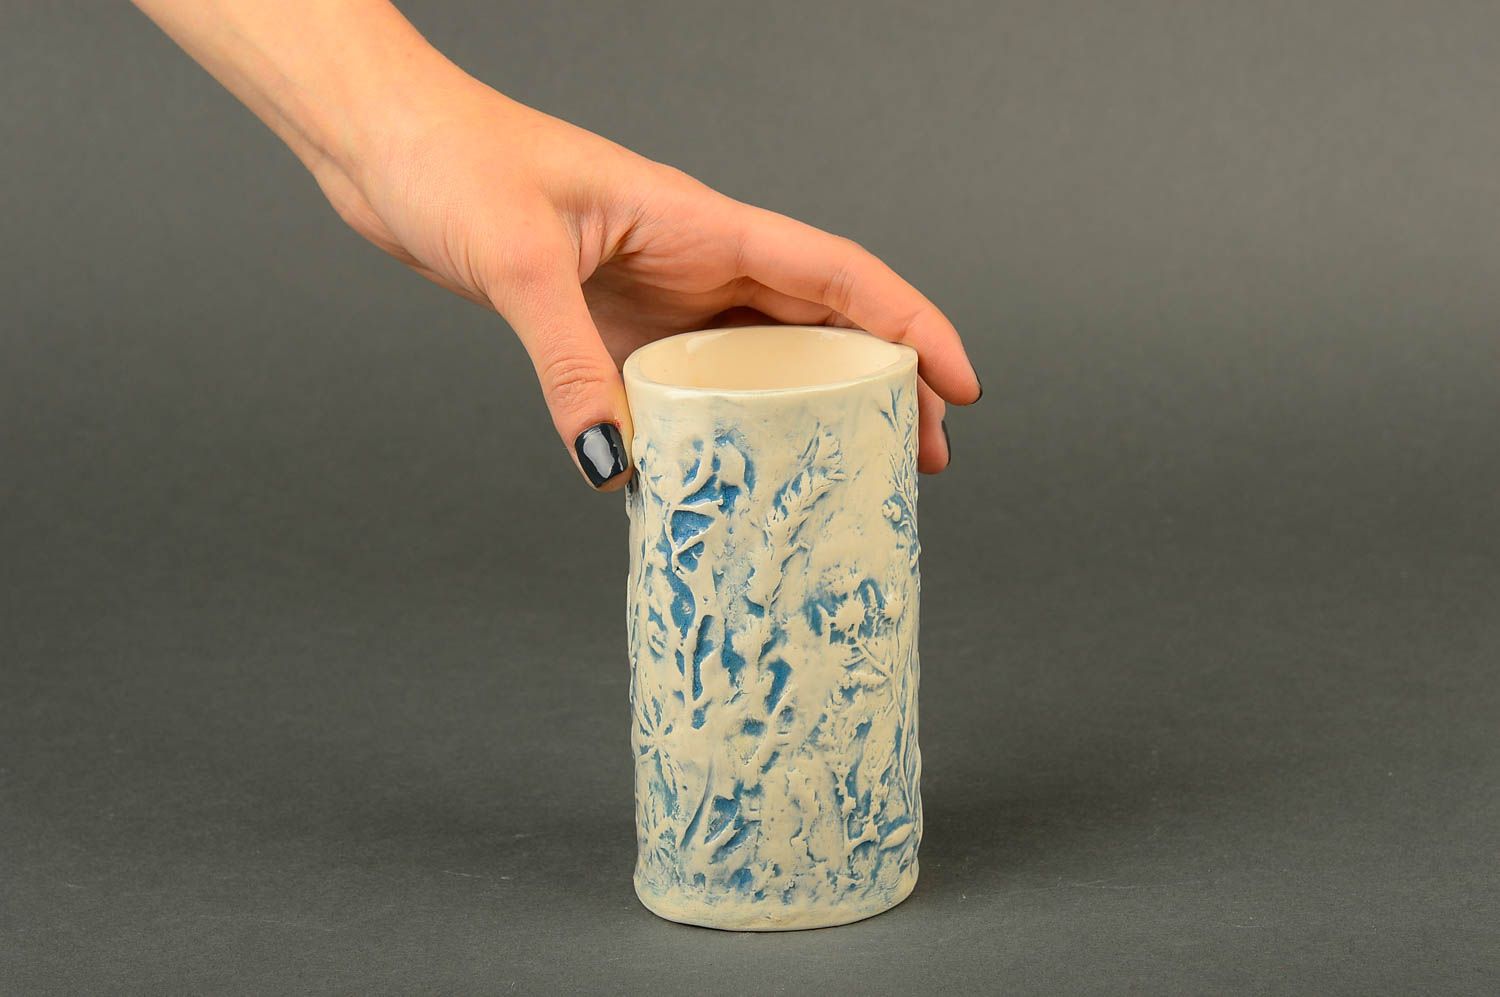 Milk ceramic handmade mug in white and blue color with floral pattern 0,54 lb photo 2